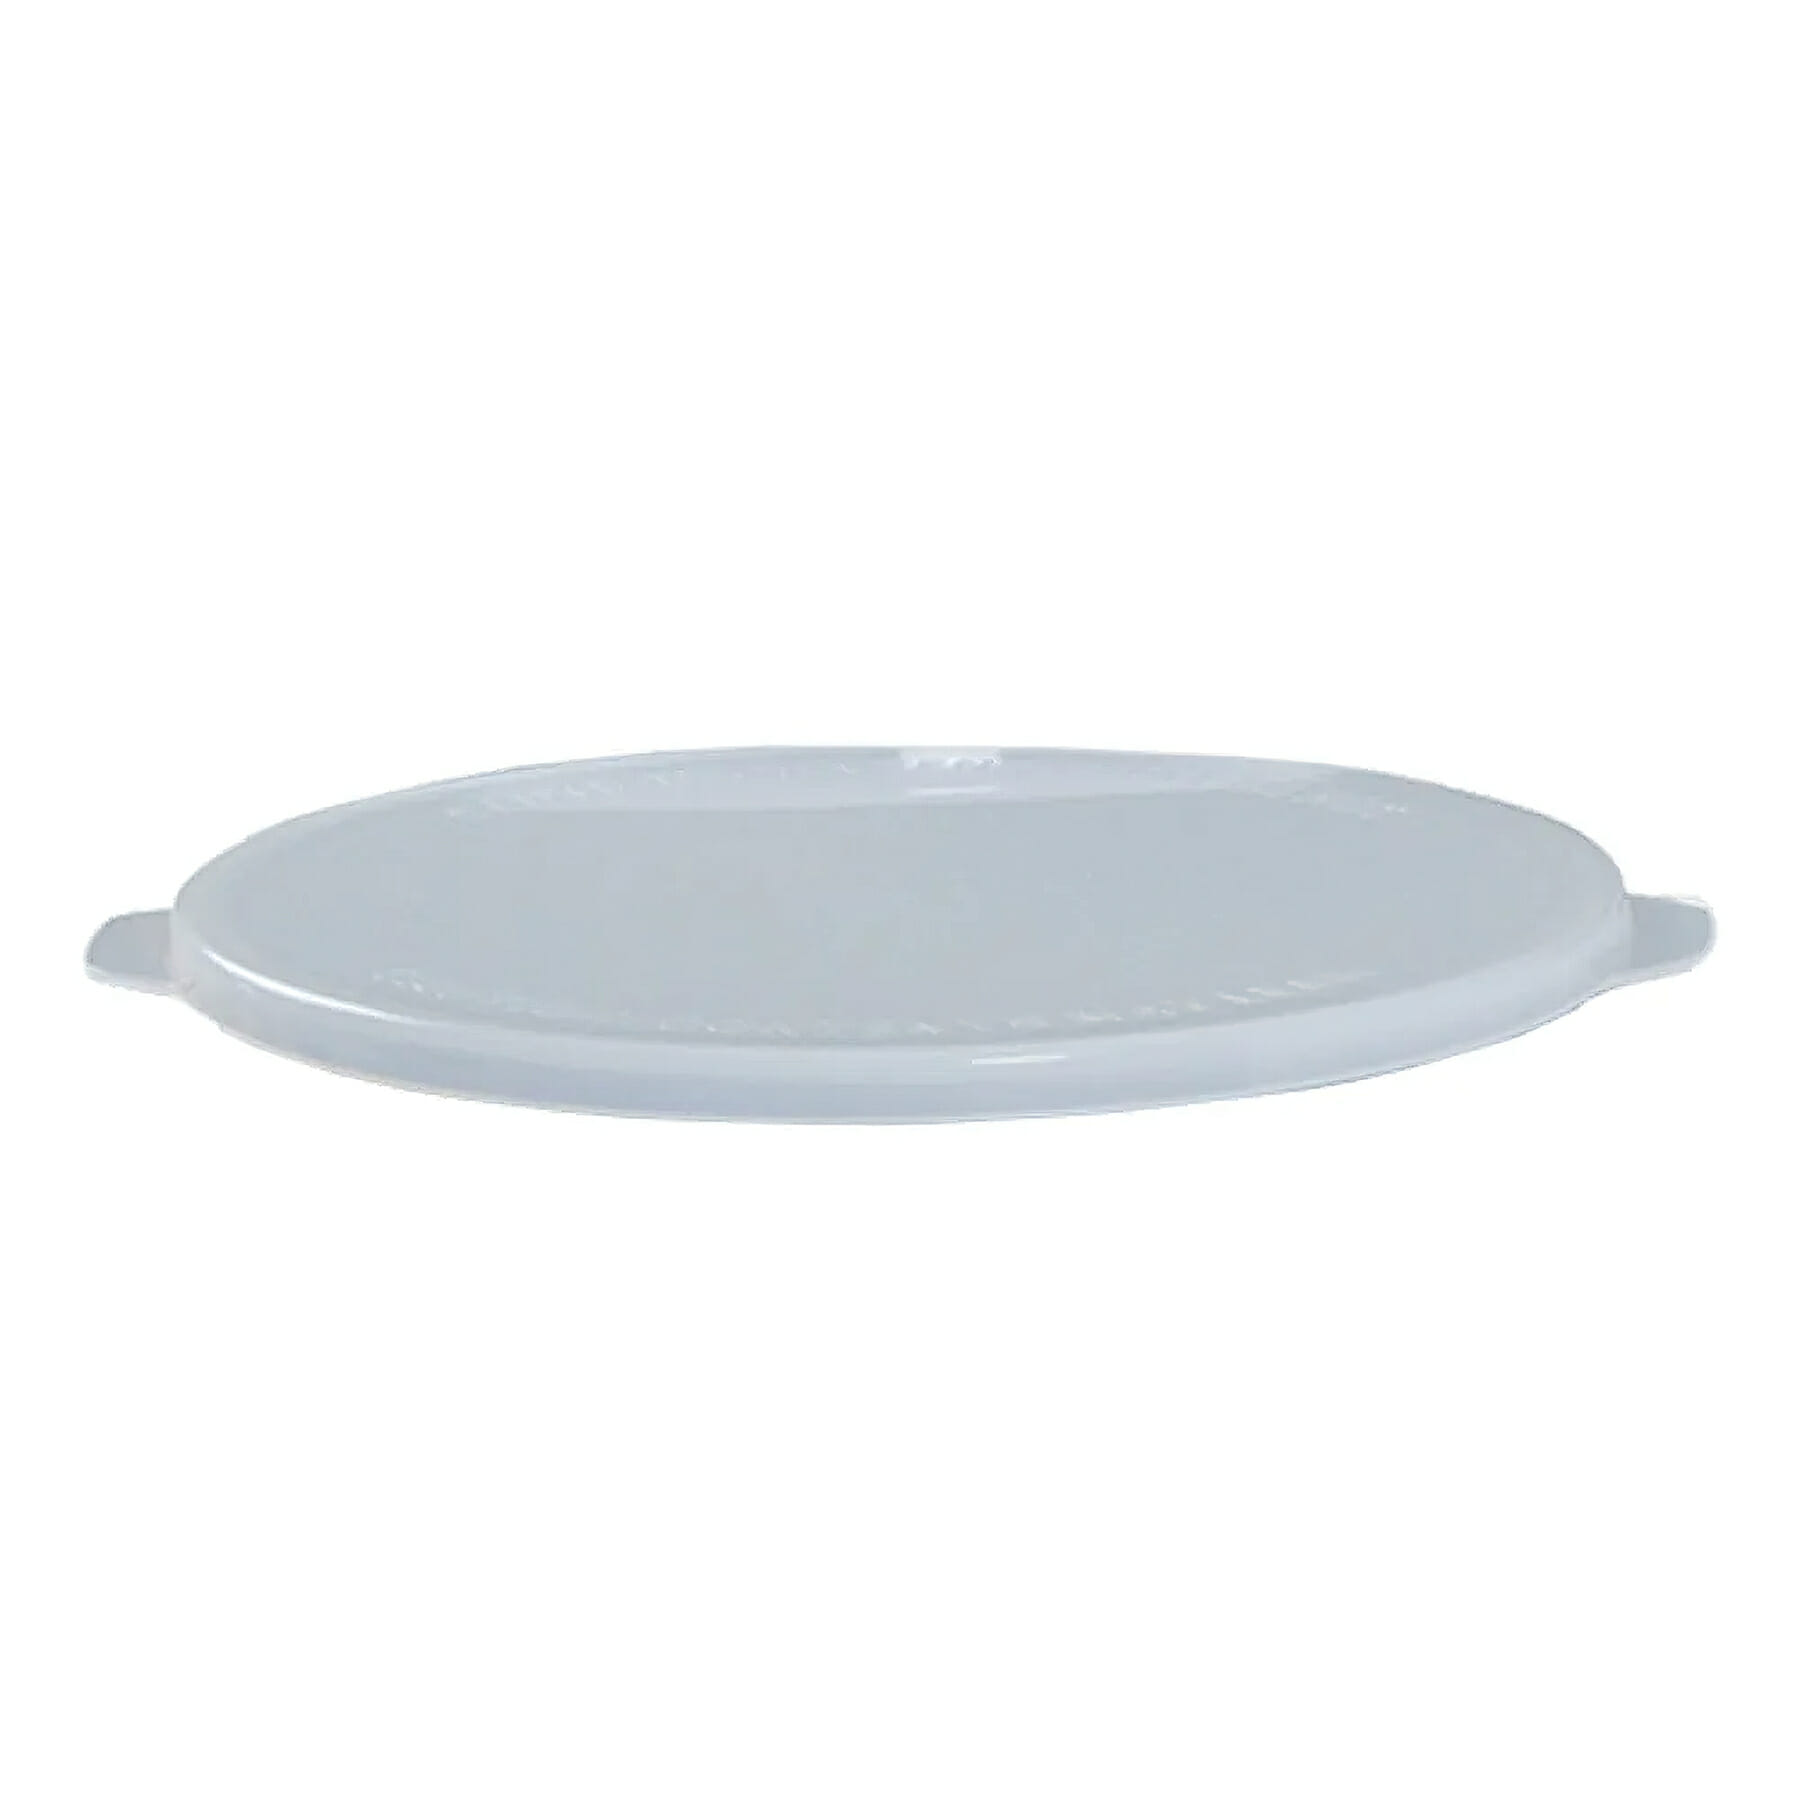 Evolution Reusable Plate Covers and Lids